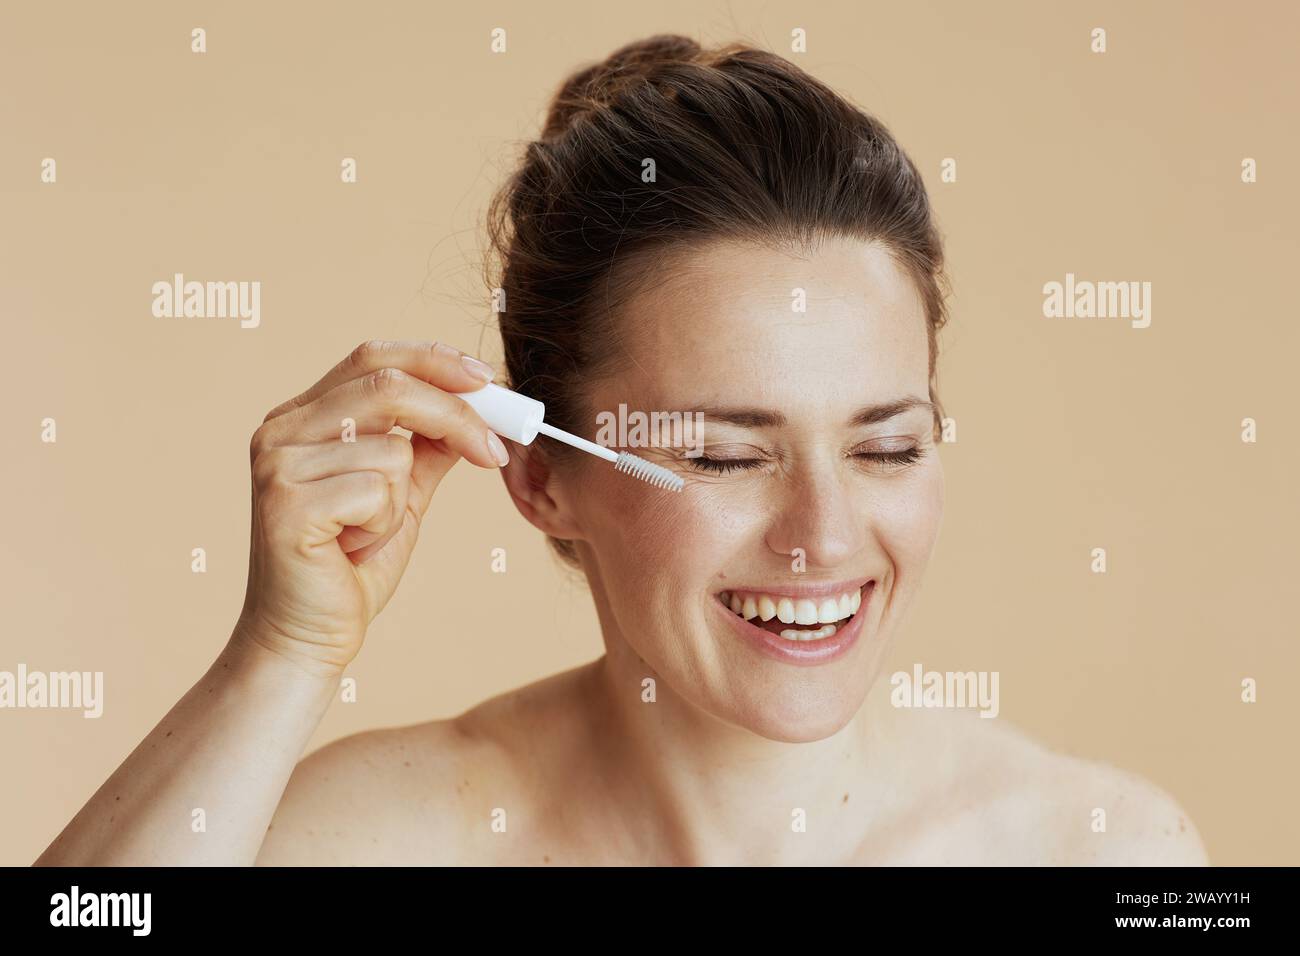 middle aged woman with brow brush isolated on beige background. Stock Photo